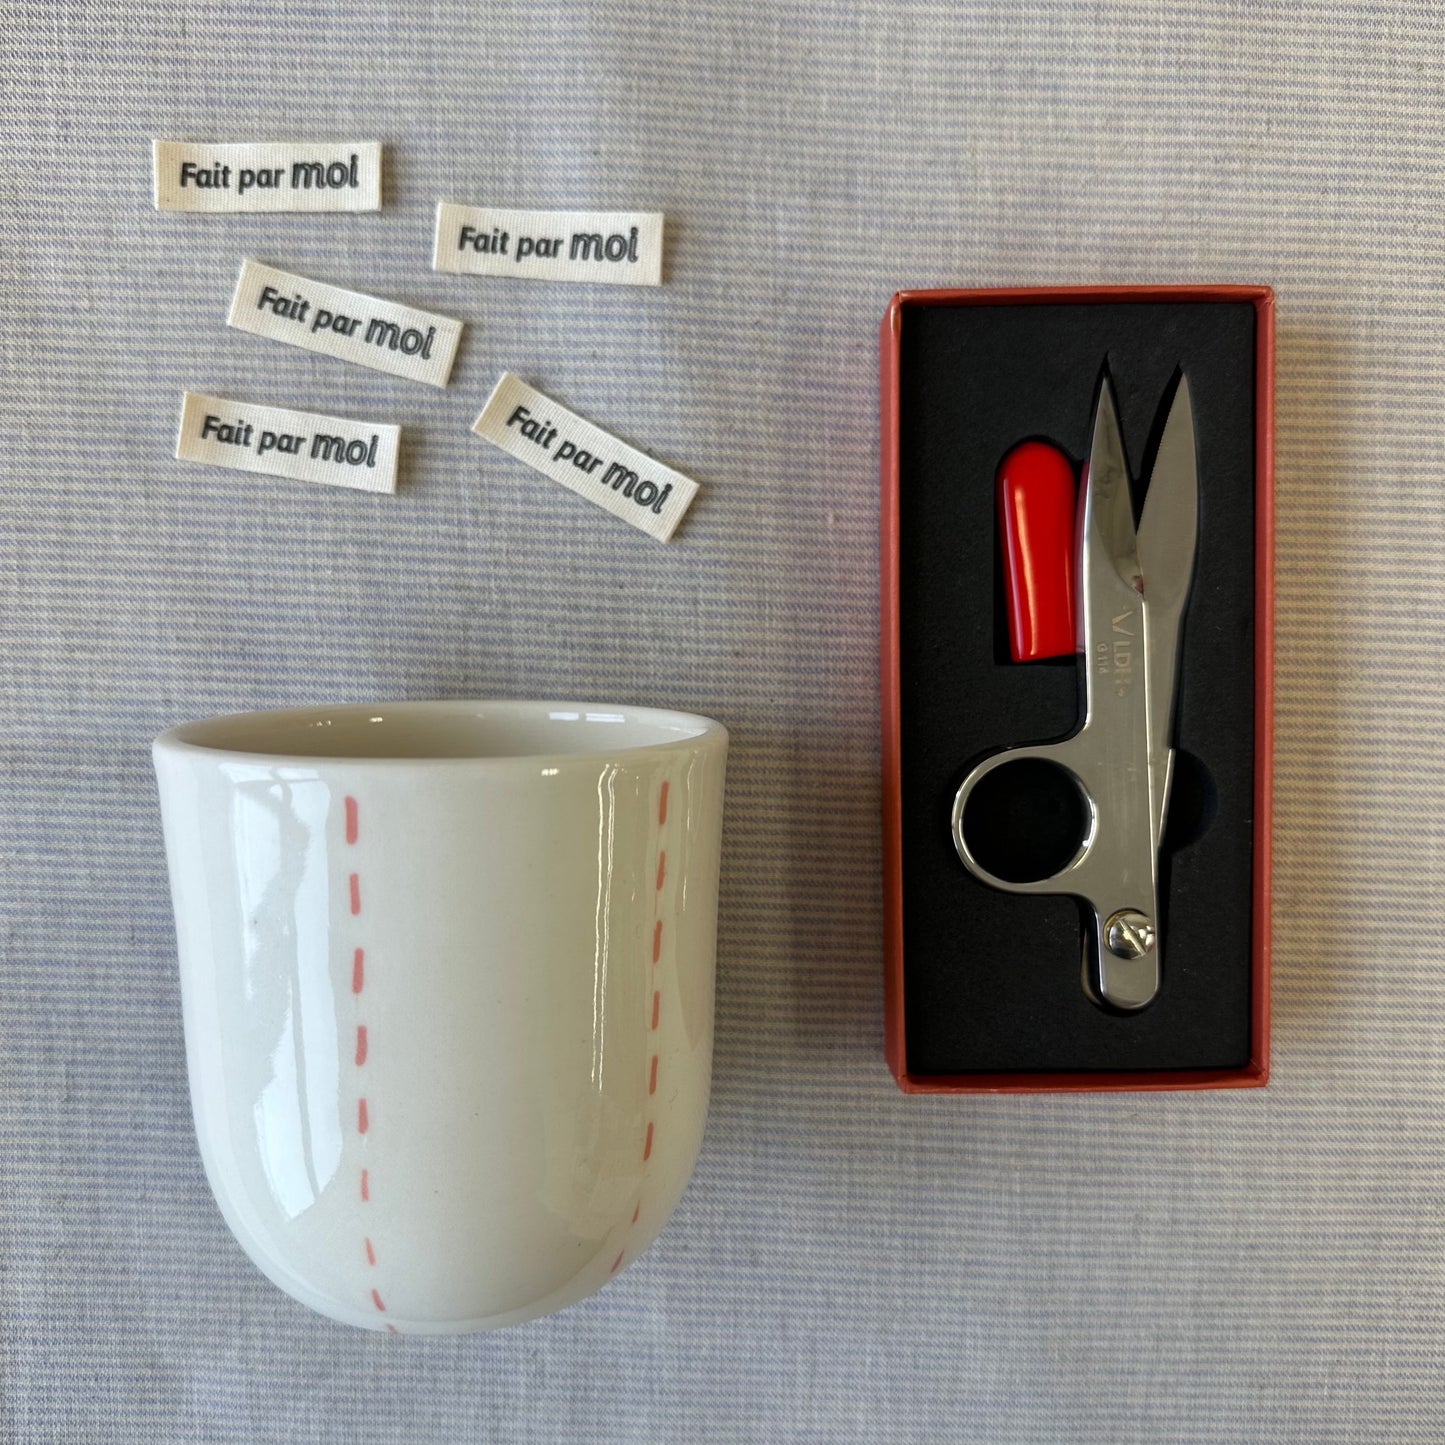 Gift set for textile art enthusiast - Mug, scissors and labels